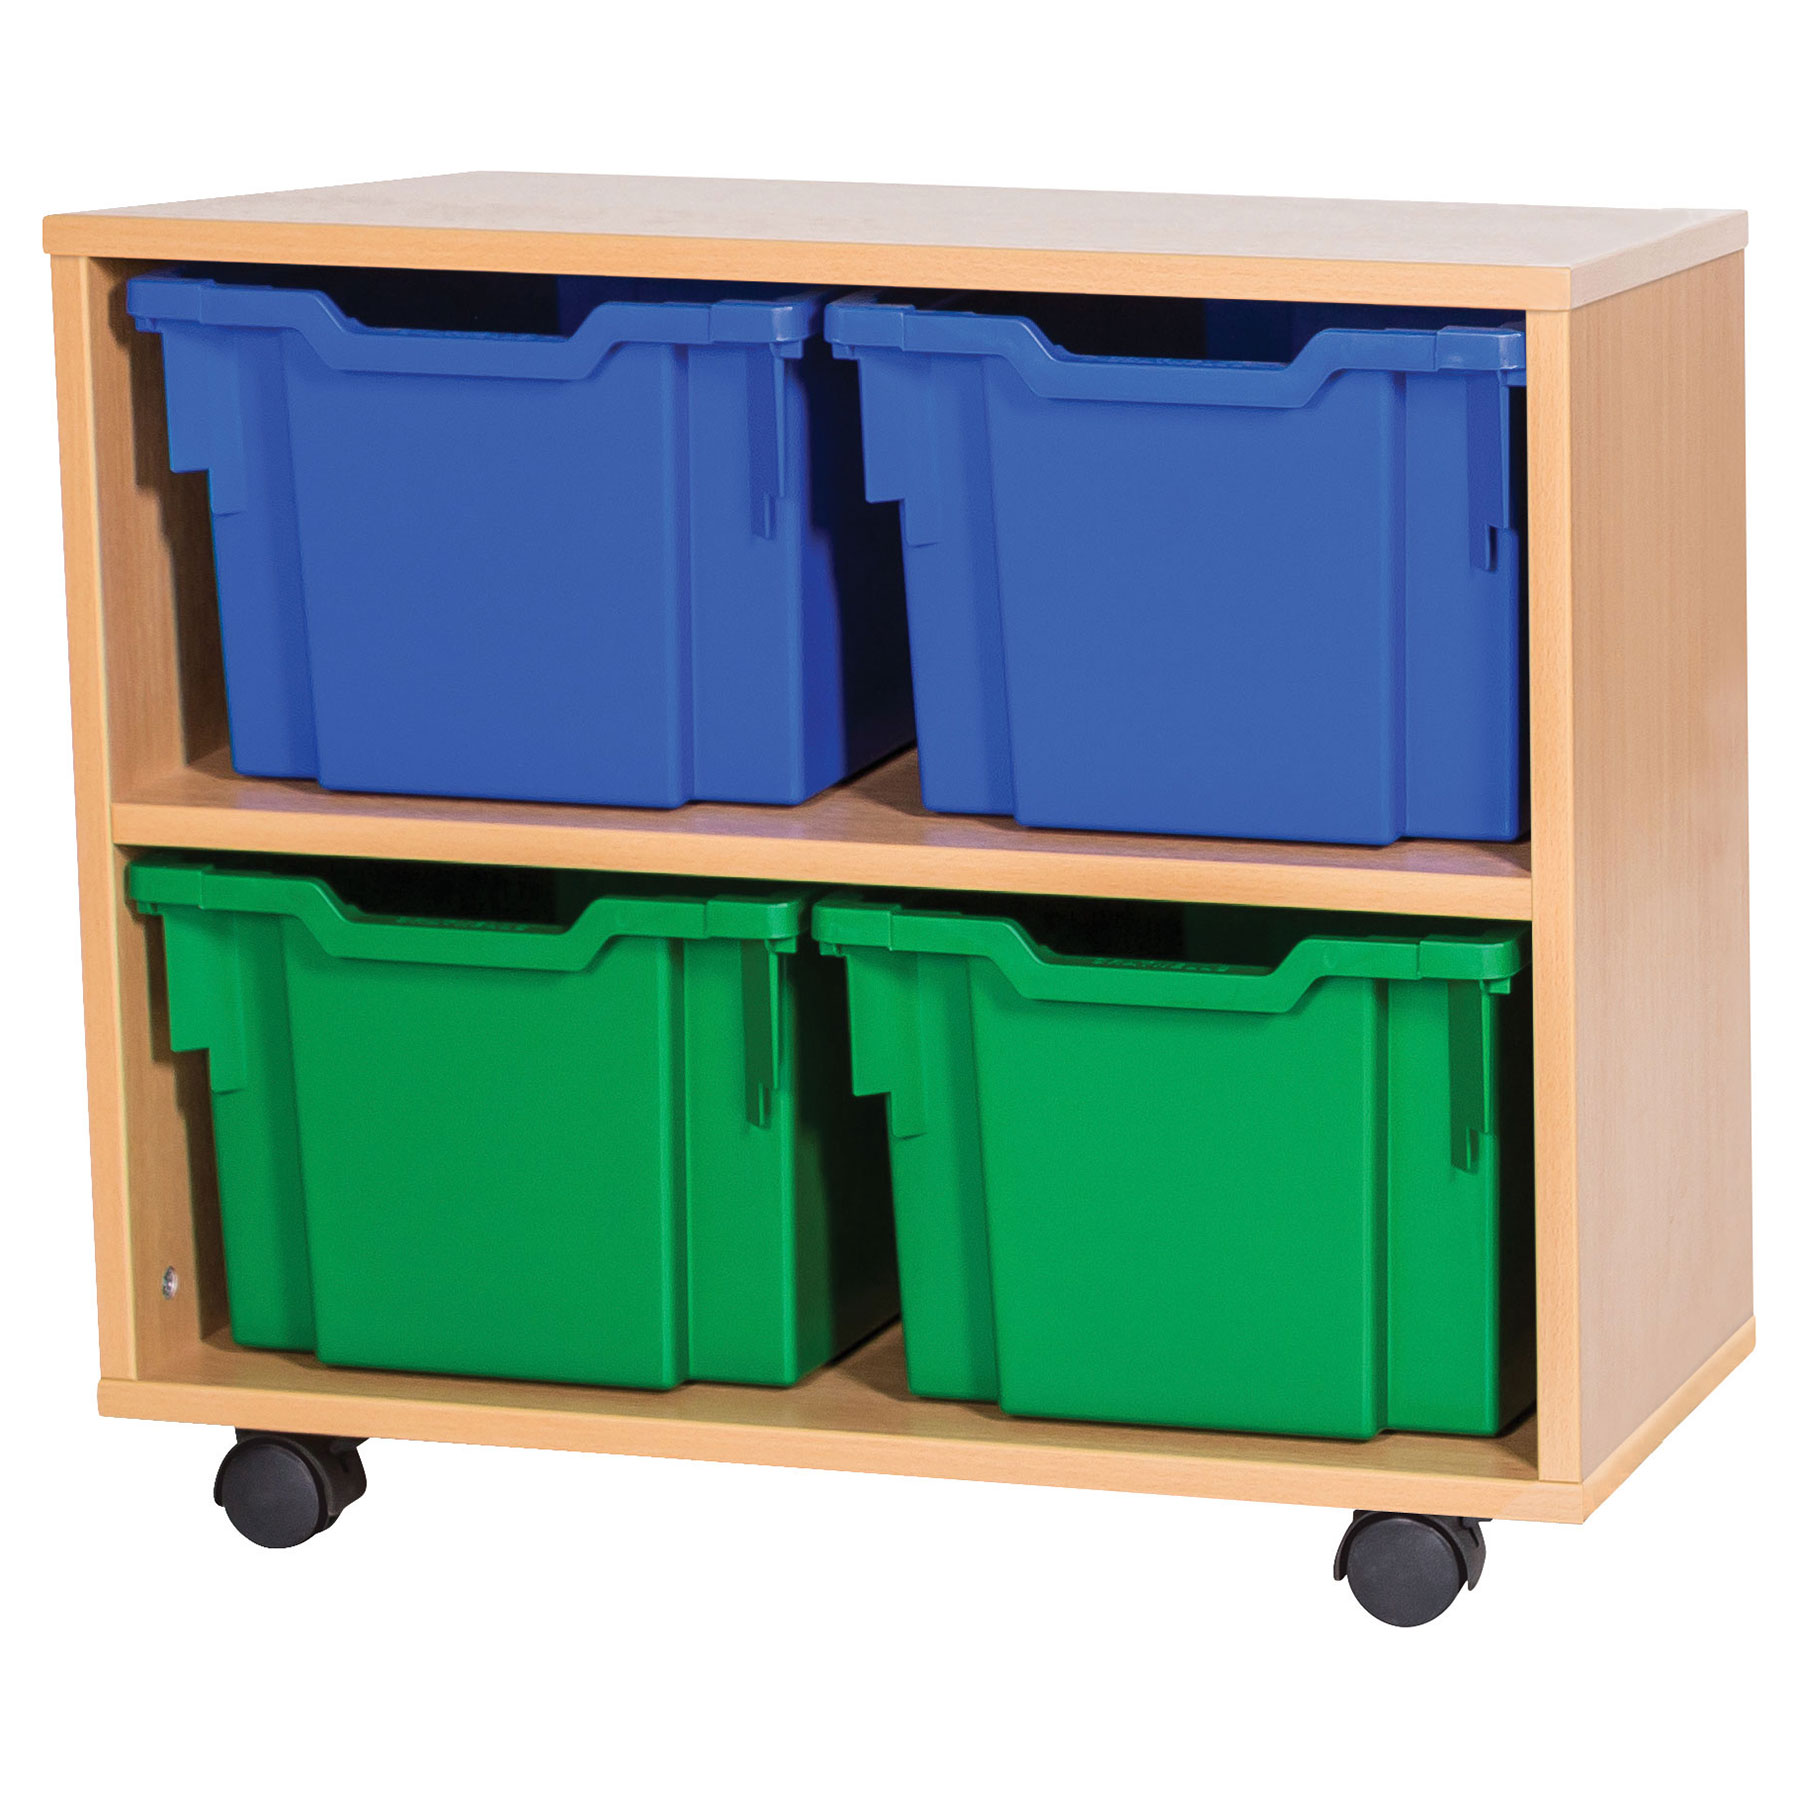 6 High Open Double Column Tray Storage (4 Extra Deep Trays)